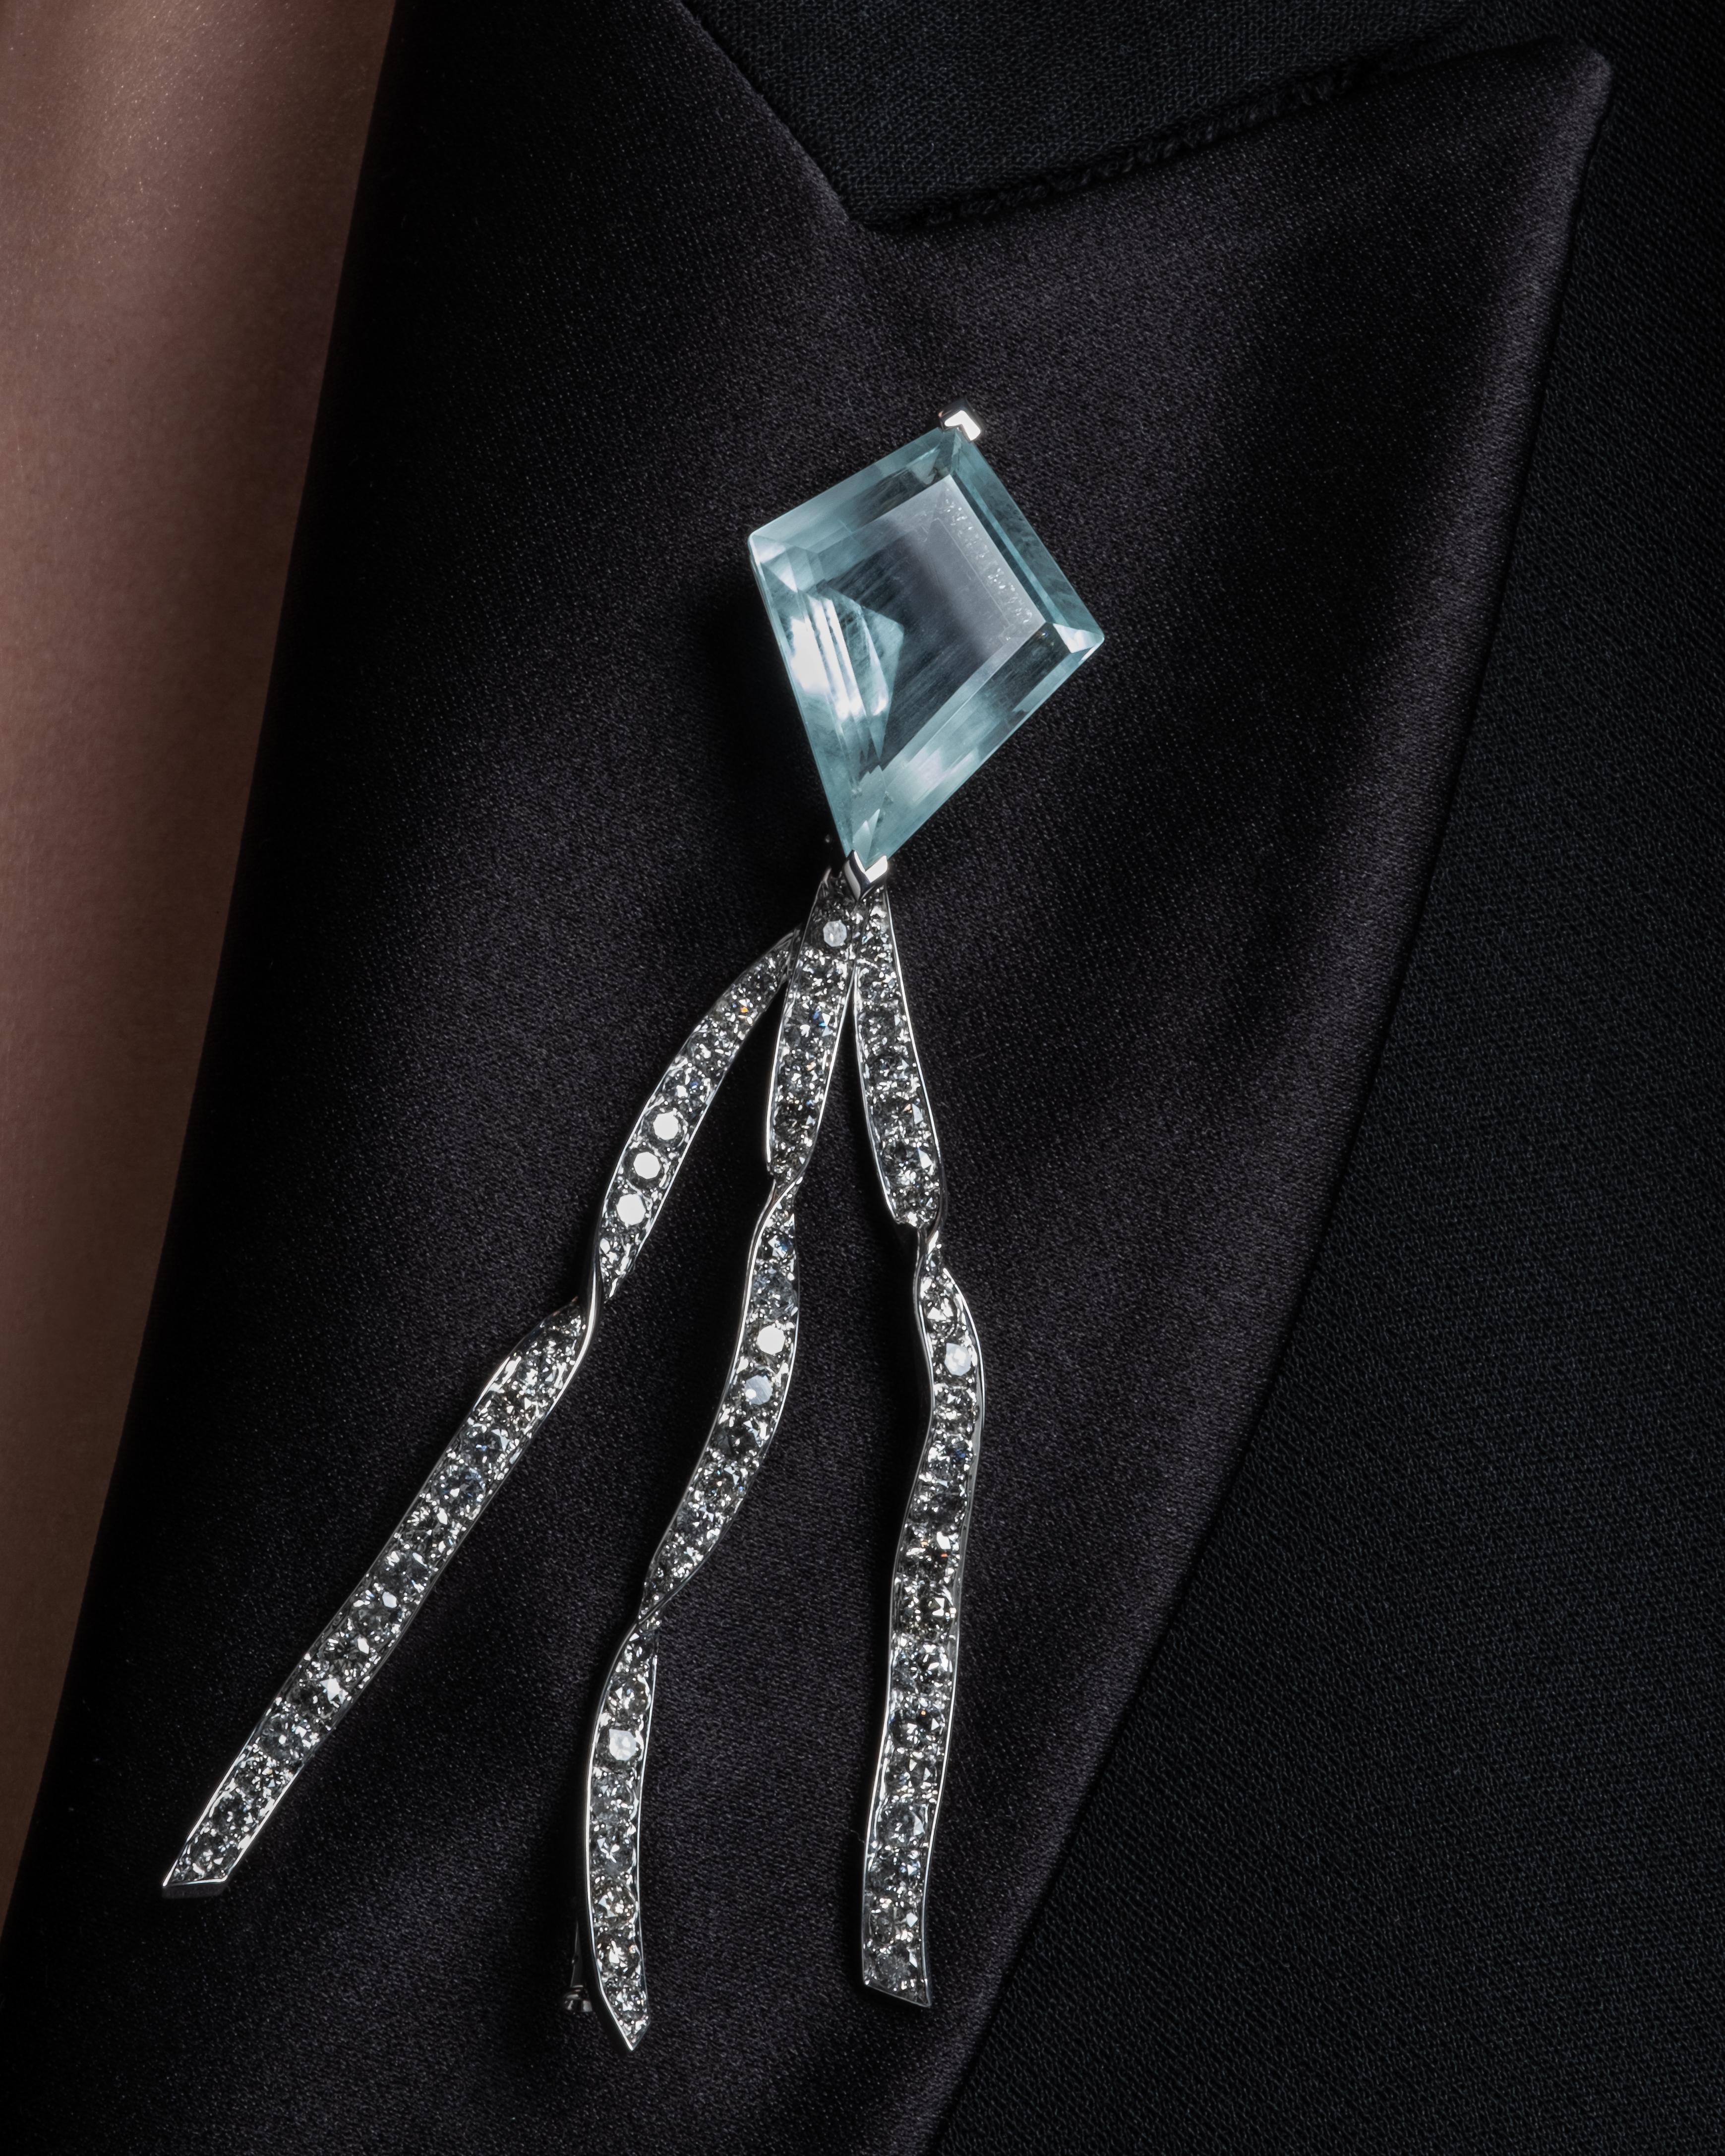 This imaginative Aquamarine and Diamond brooch features pure artistry inspired by the limitless beauty beyond our imagination, personal freedom, and ultimate happiness through devotion and unwavering faith, giving this kite brooch a powerful